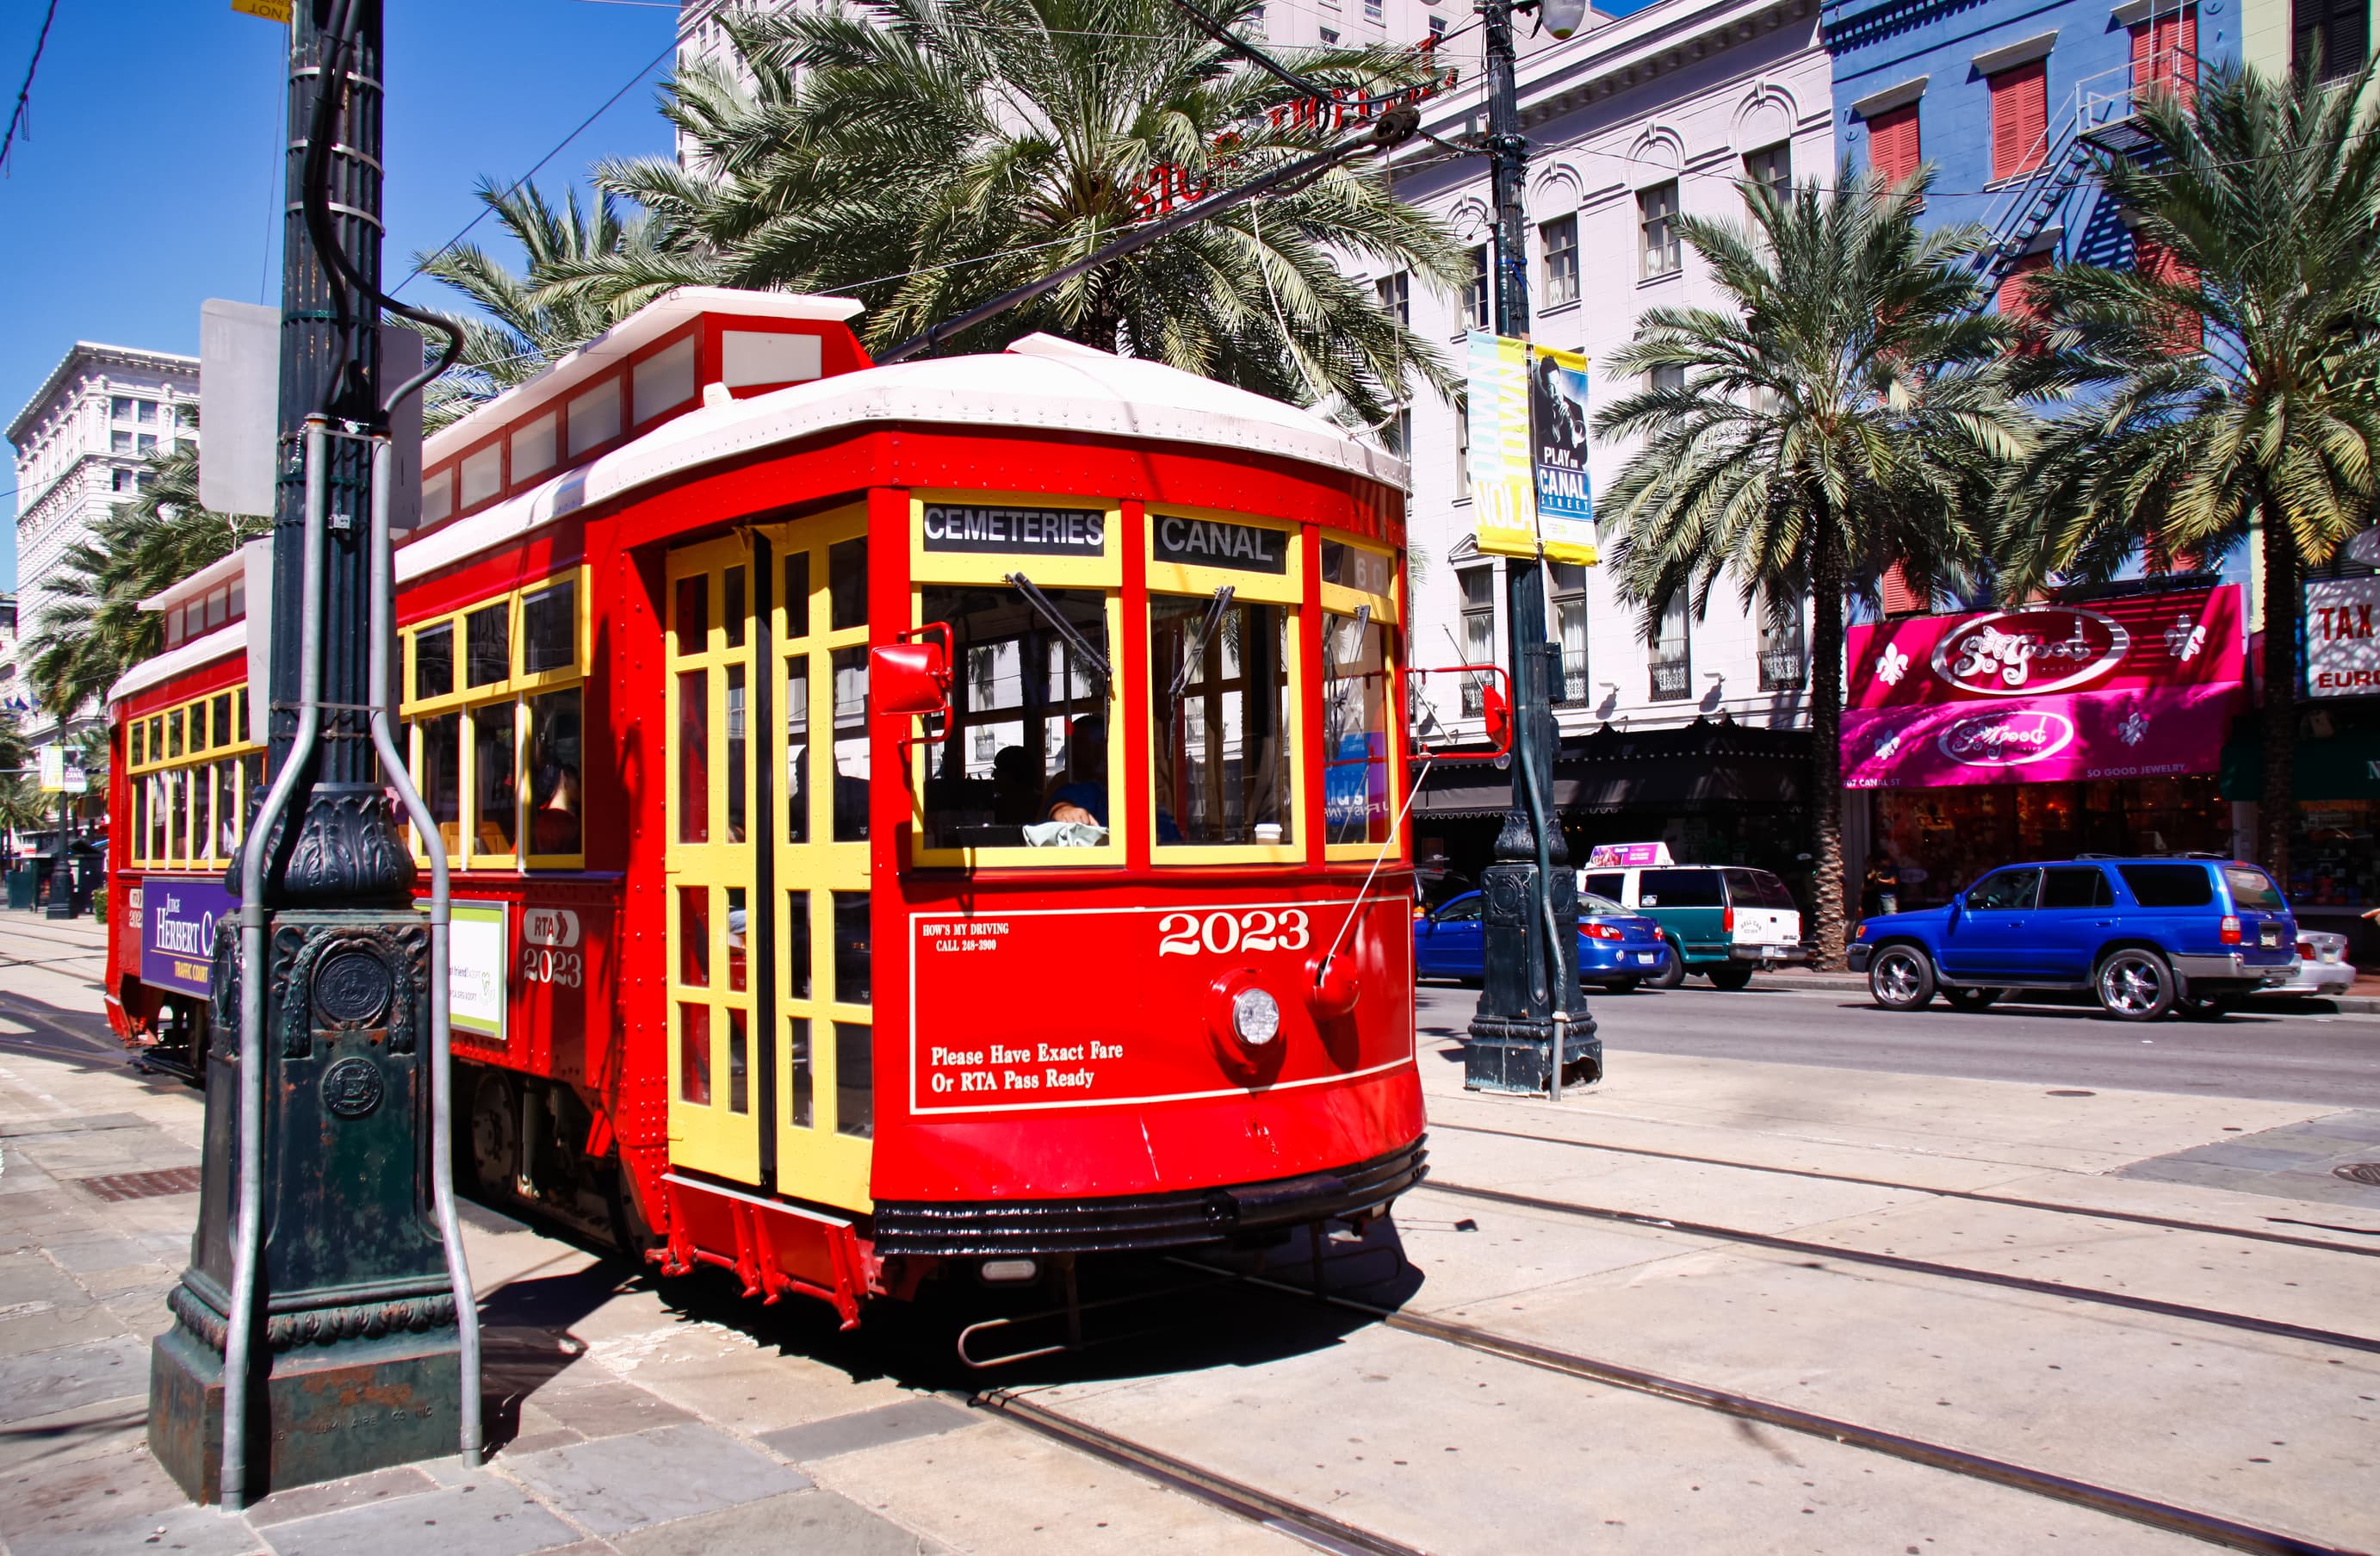 A red streetcar in New Orleans